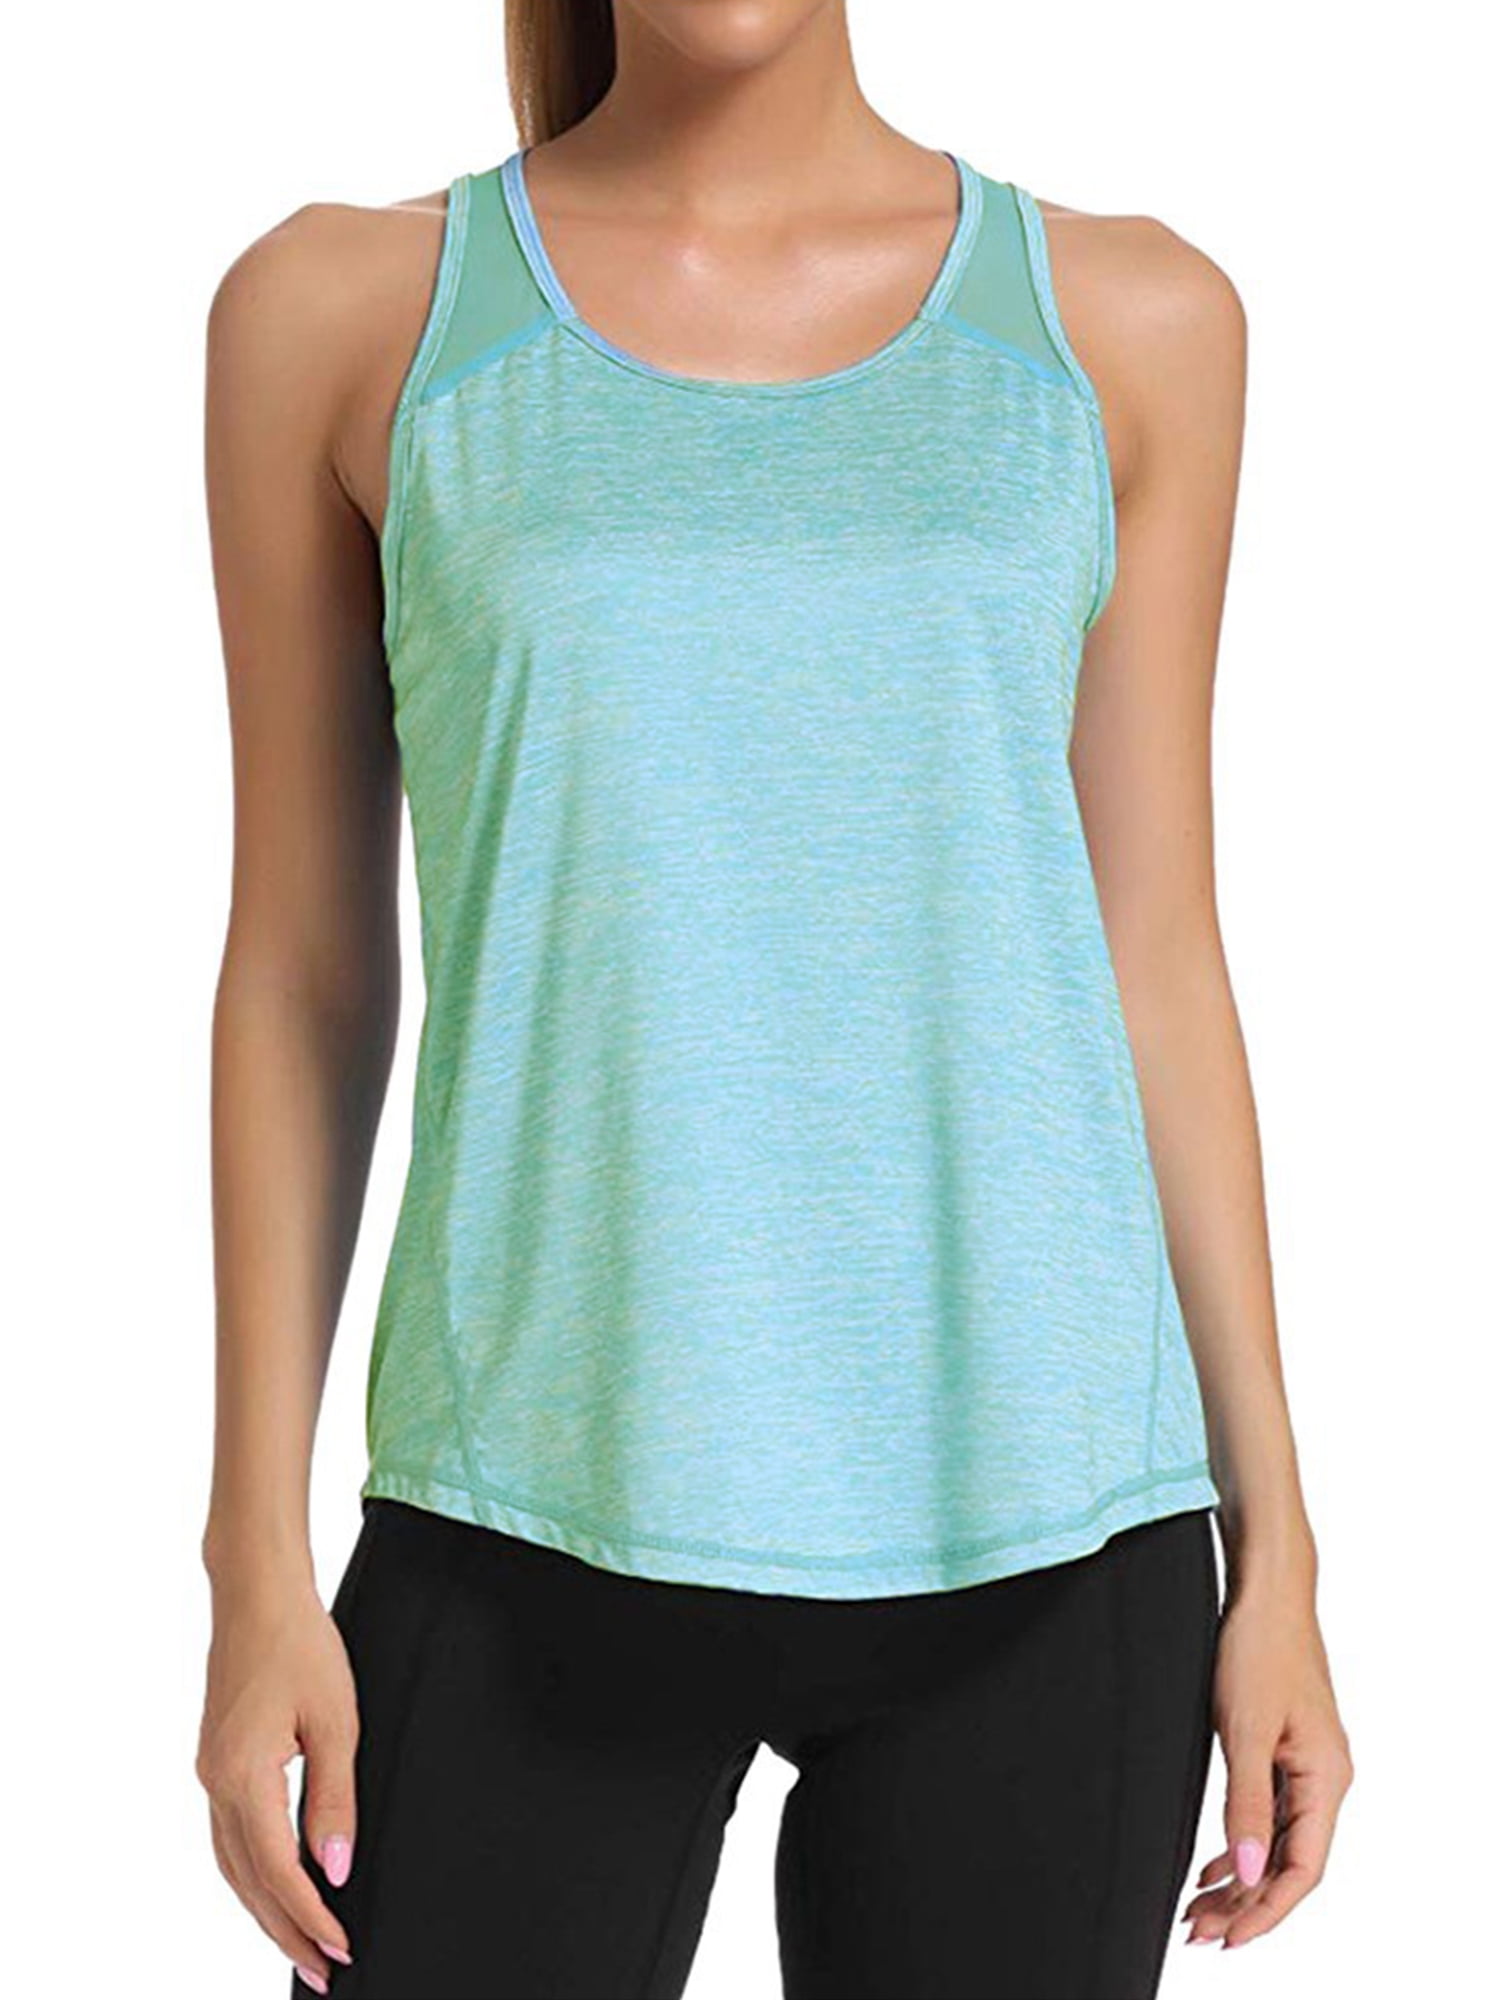 Casual Beach Tanks Loose Sports Tank Tops for Women Round Neck ...